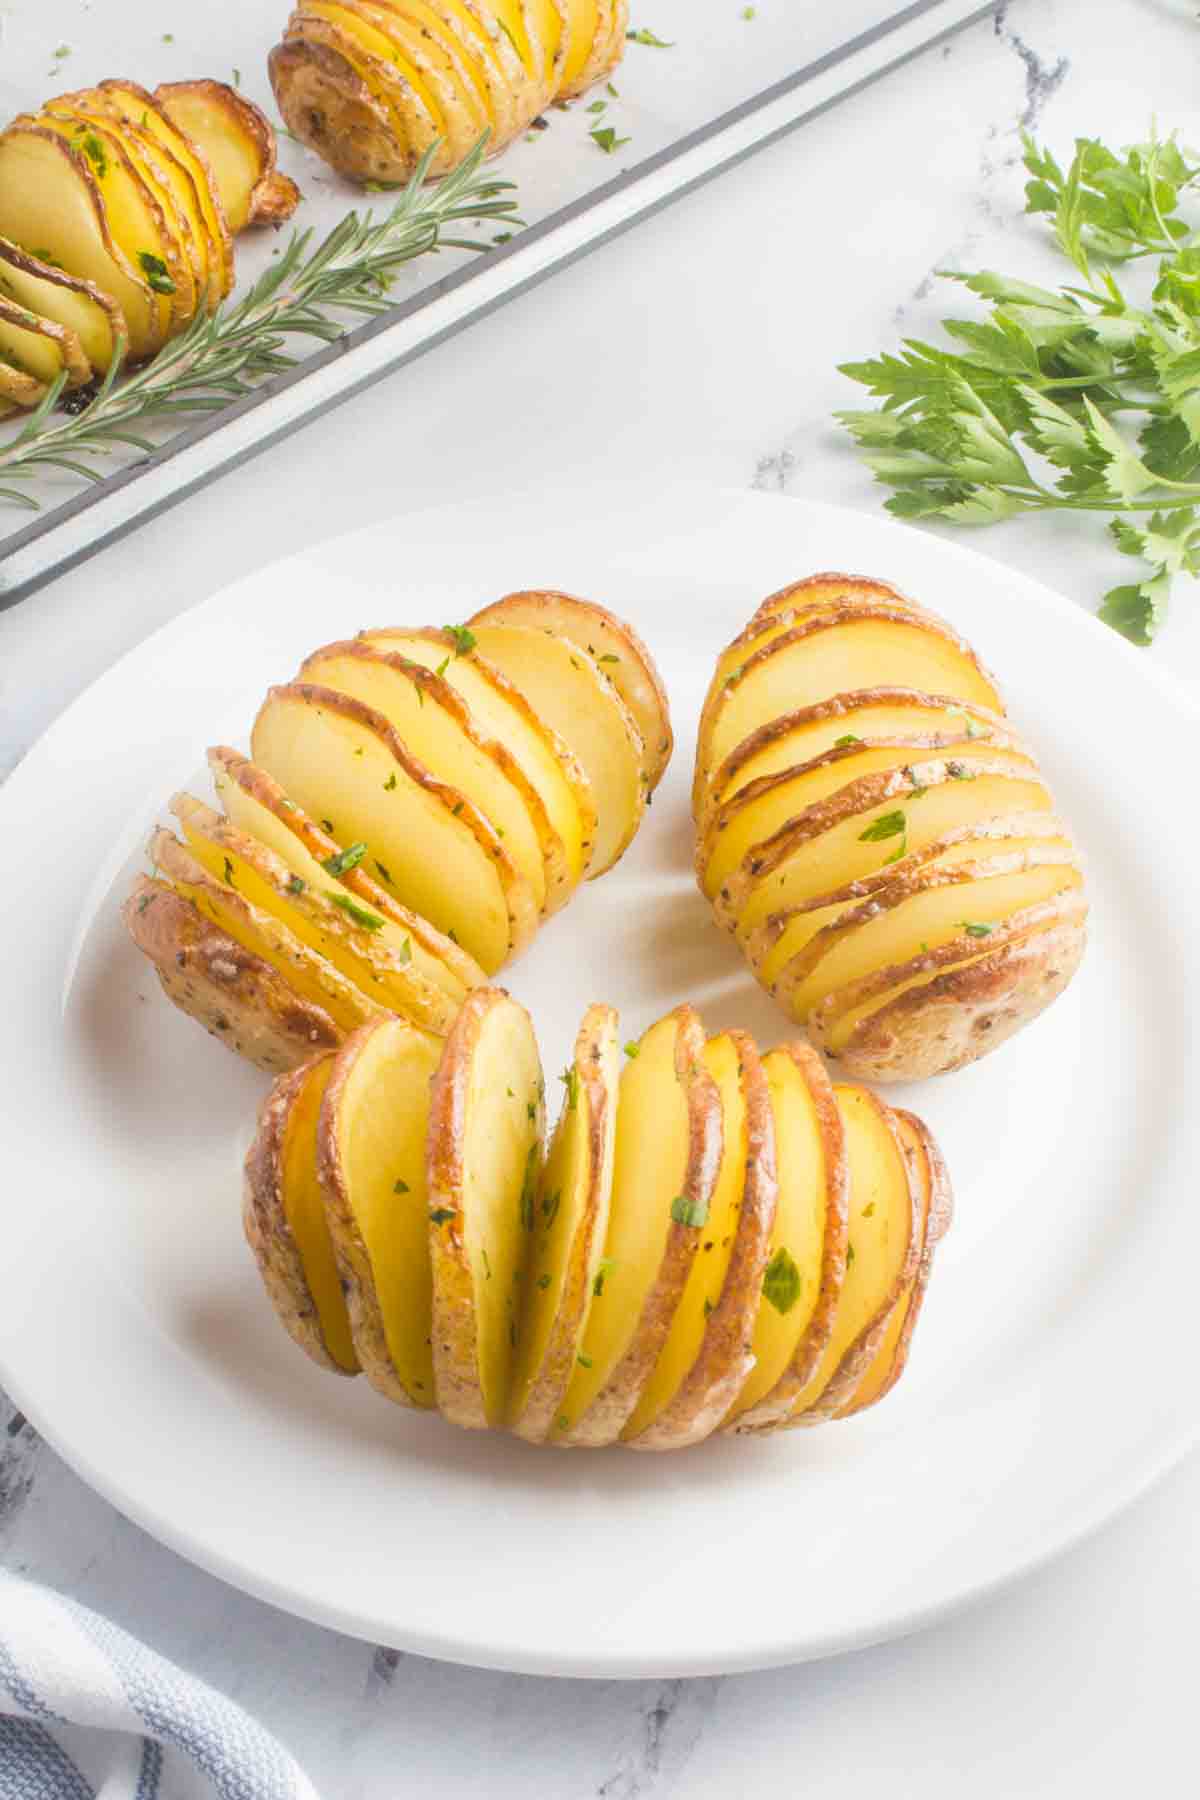 The image displays three rosemary hasselback potatoes on a plate. These potatoes have been sliced and seasoned, with rosemary adding a fragrant touch. Next to the plate, there is a baking pan containing the remaining cooked potatoes, ready to be enjoyed.